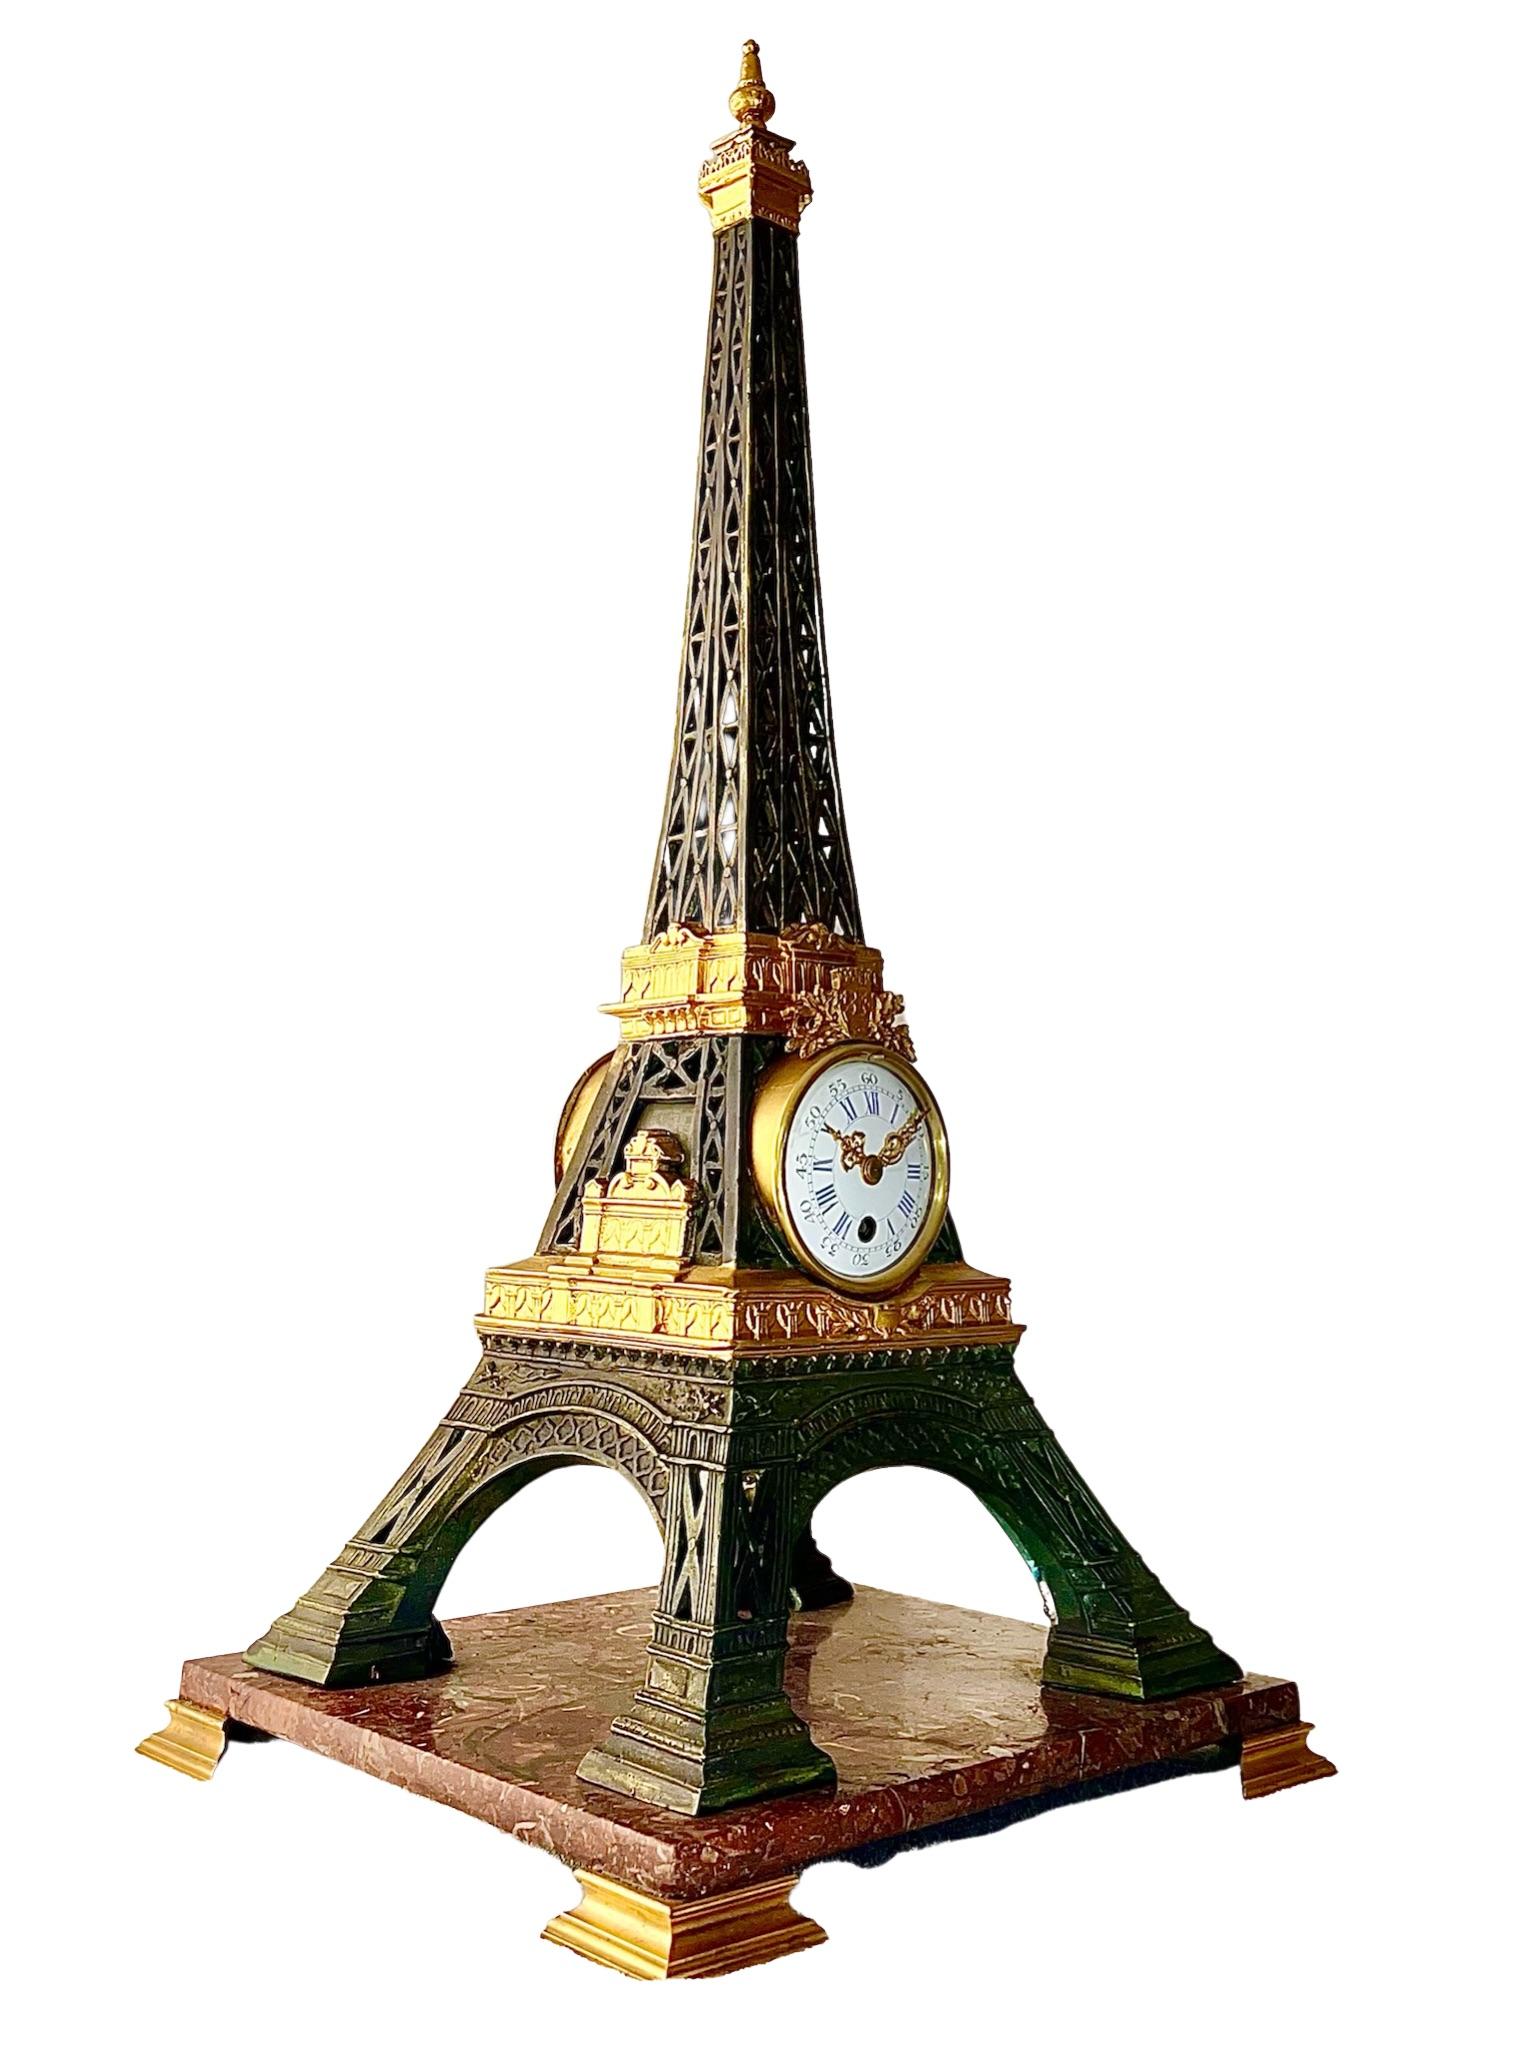 A magnificent French antique clock in the style of The Eiffel Tower. It was produced in the late 19th Century as a souvenir to celebrate the building of this iconic French landmark.

The clock is in a bronze case on a rouge griotte marble base,